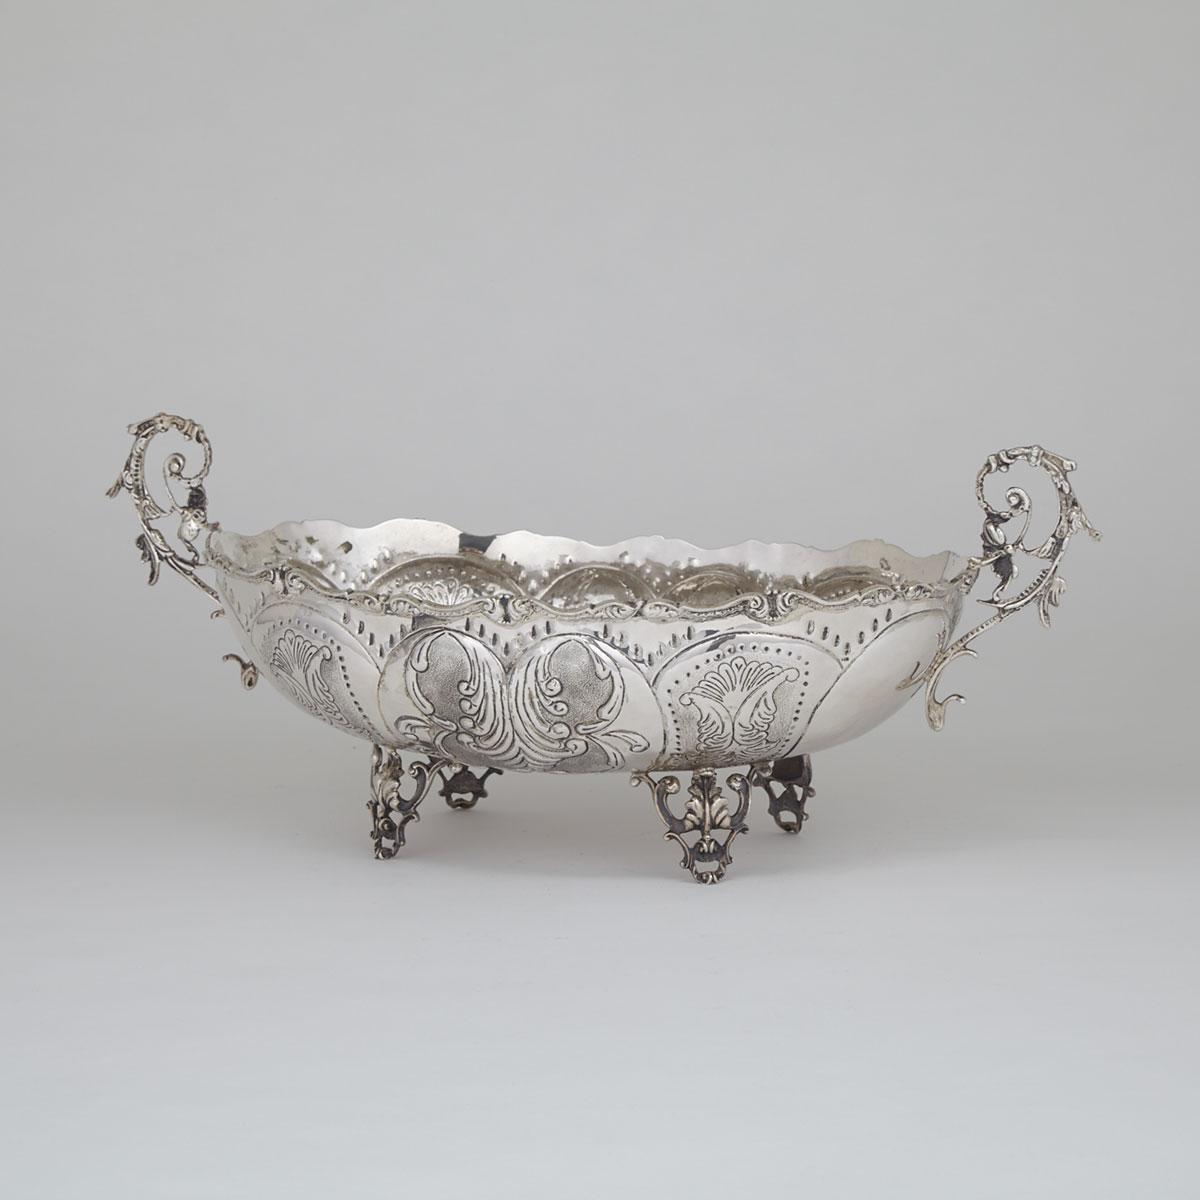 South European Silver Oval Two-Handled Bowl, 20th century